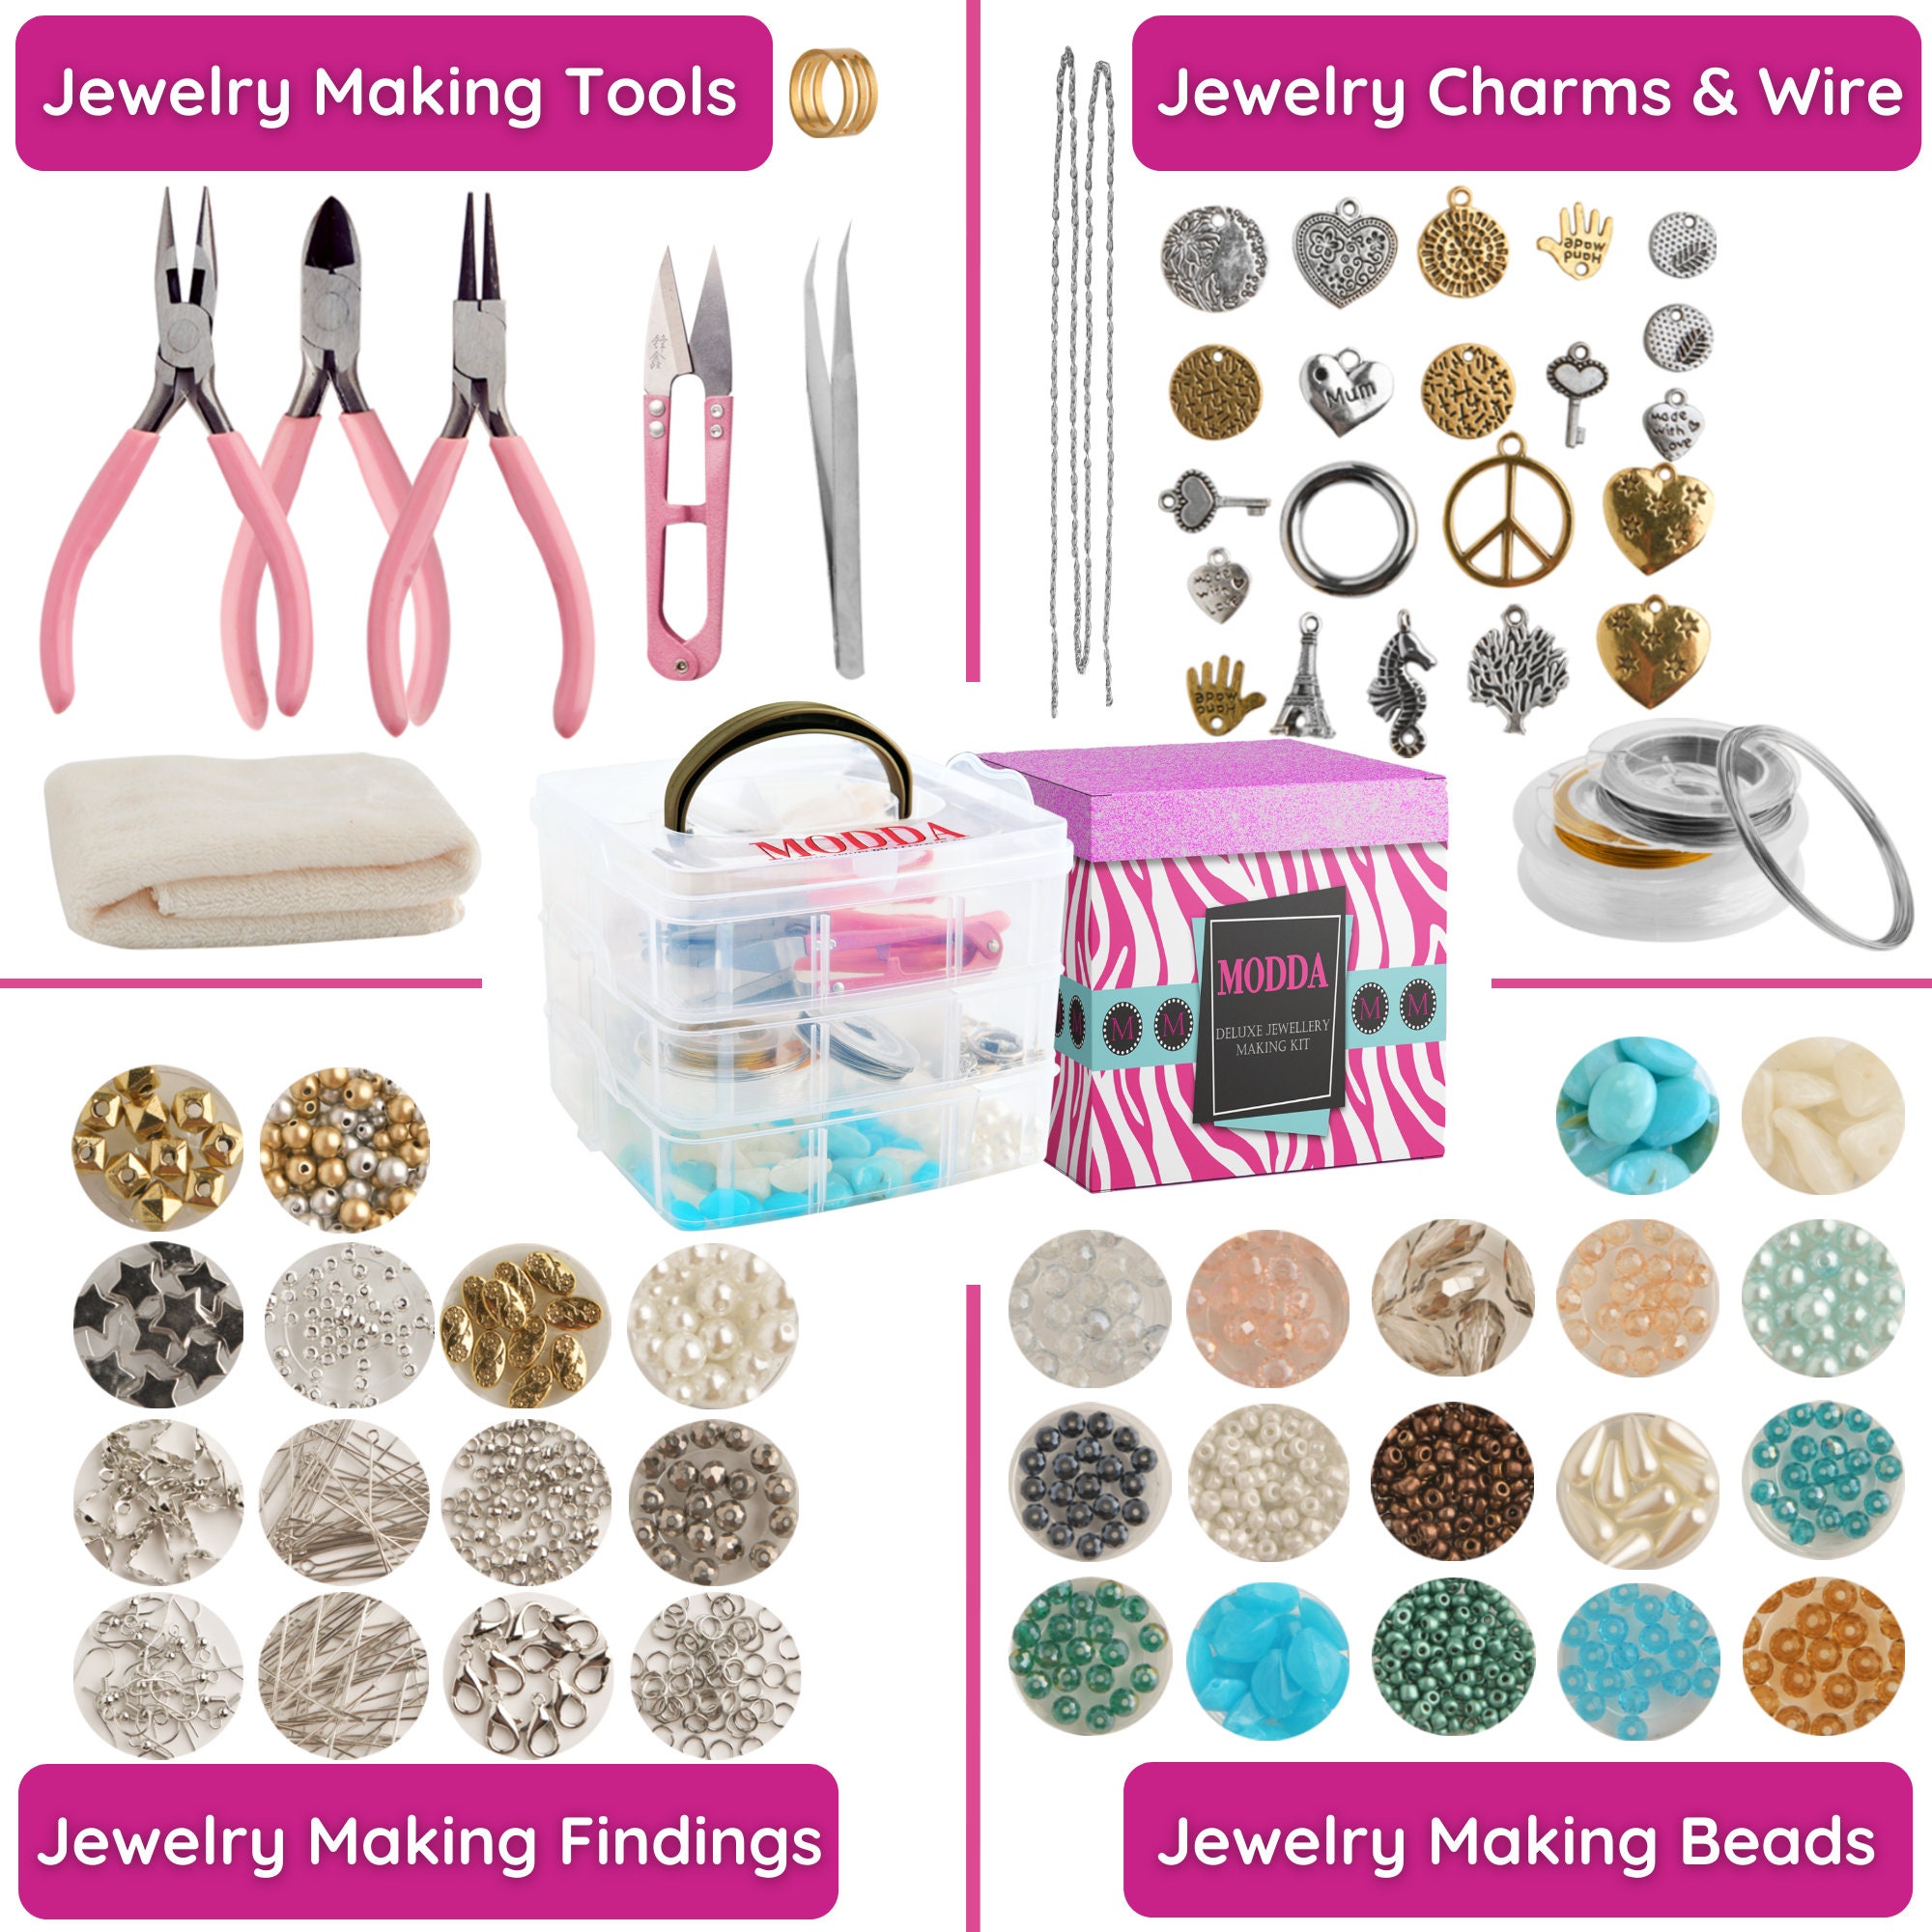 MODDA Deluxe Jewelry Making Kit with Video Course, Egypt